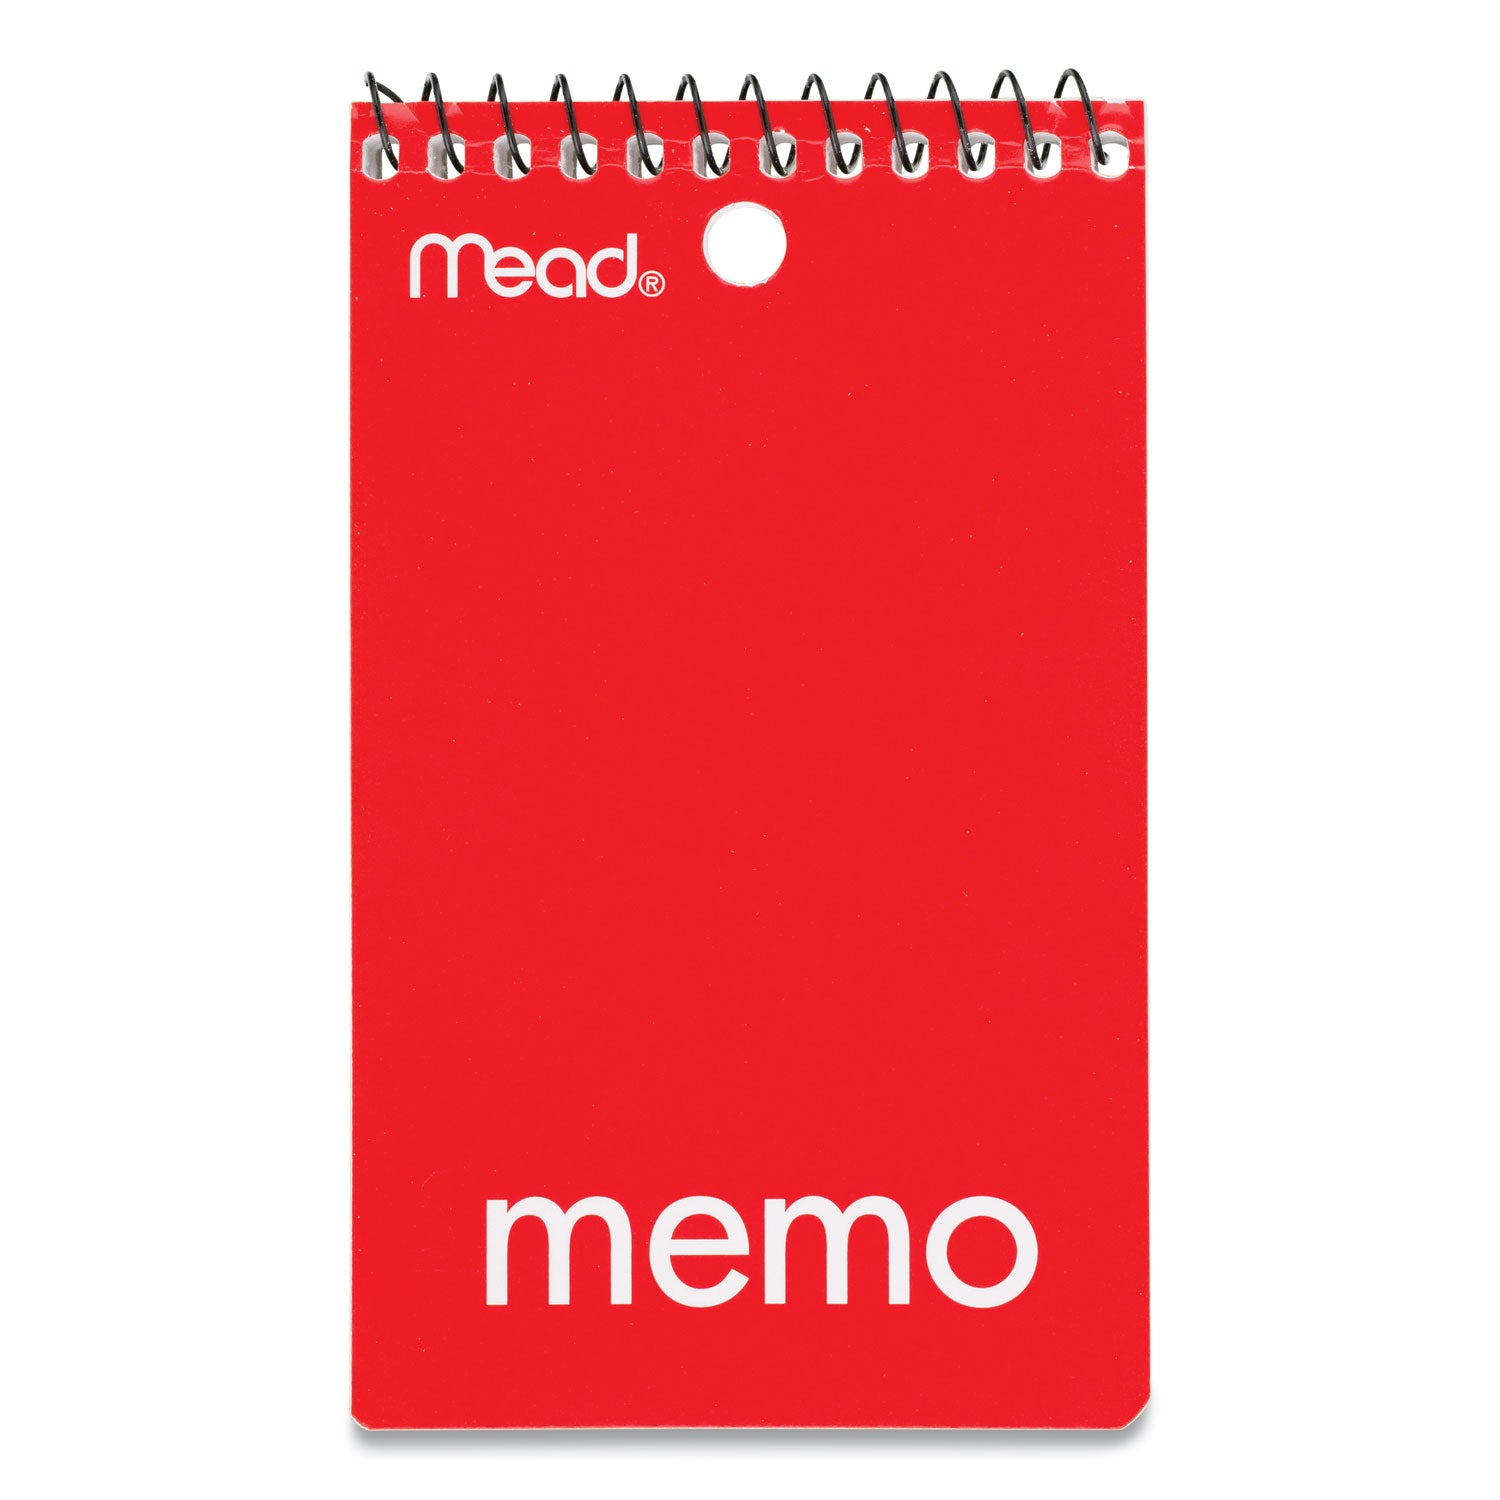 Wirebound Memo Pad with Wall-Hanger Eyelet, Medium/College Rule, Randomly Assorted Cover Colors, 60 White 3 x 5 Sheets - 